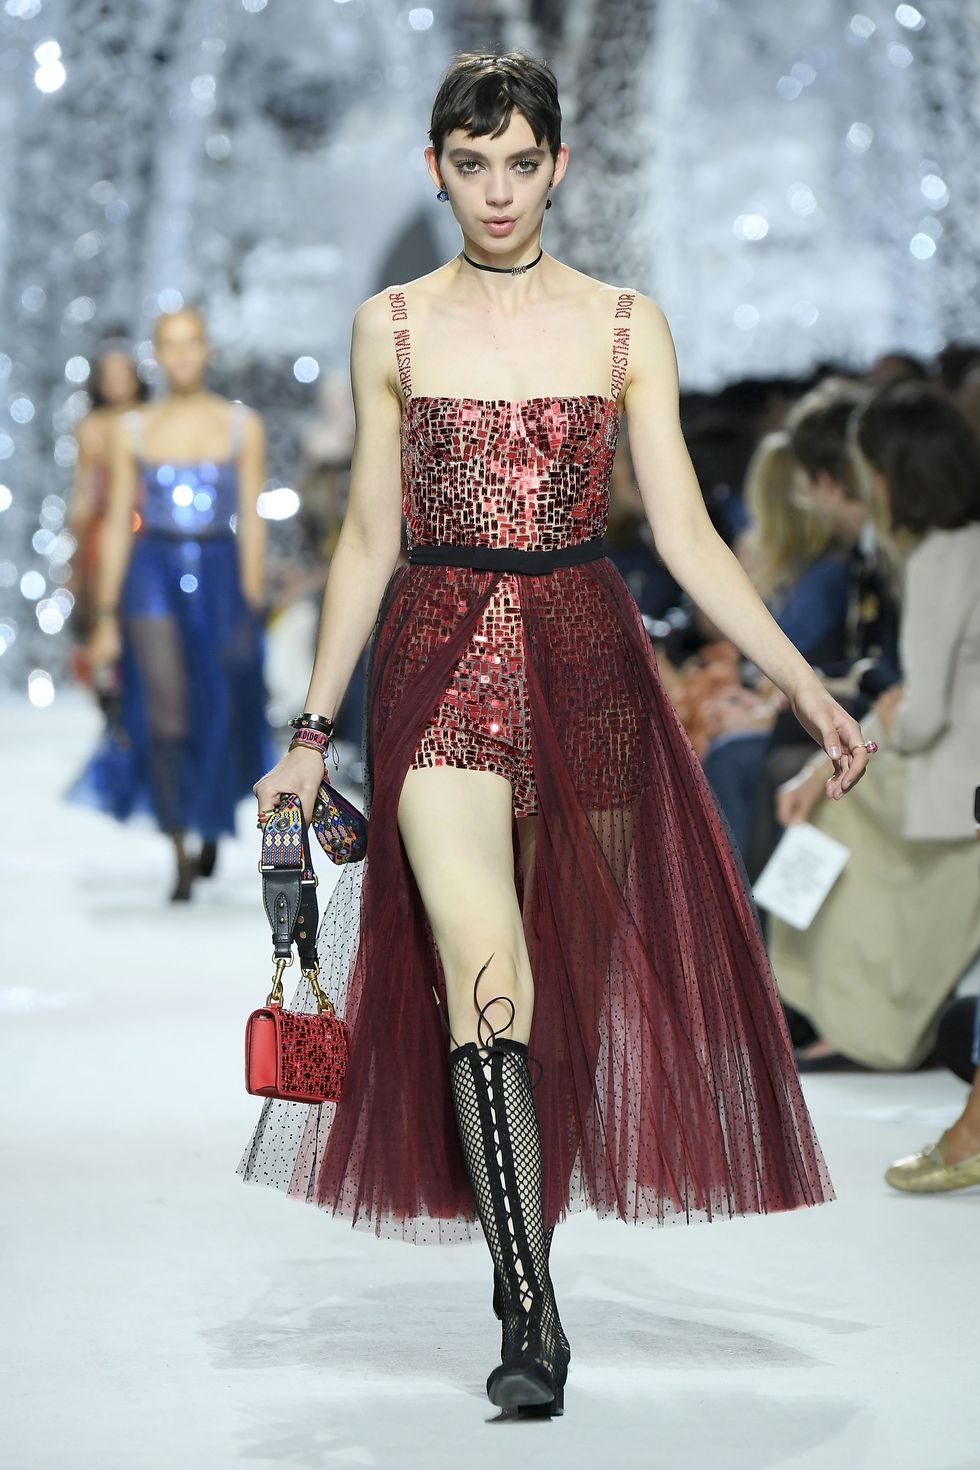 Christian Dior 21st Century Jaipur Gypsy Beaded and Sequined